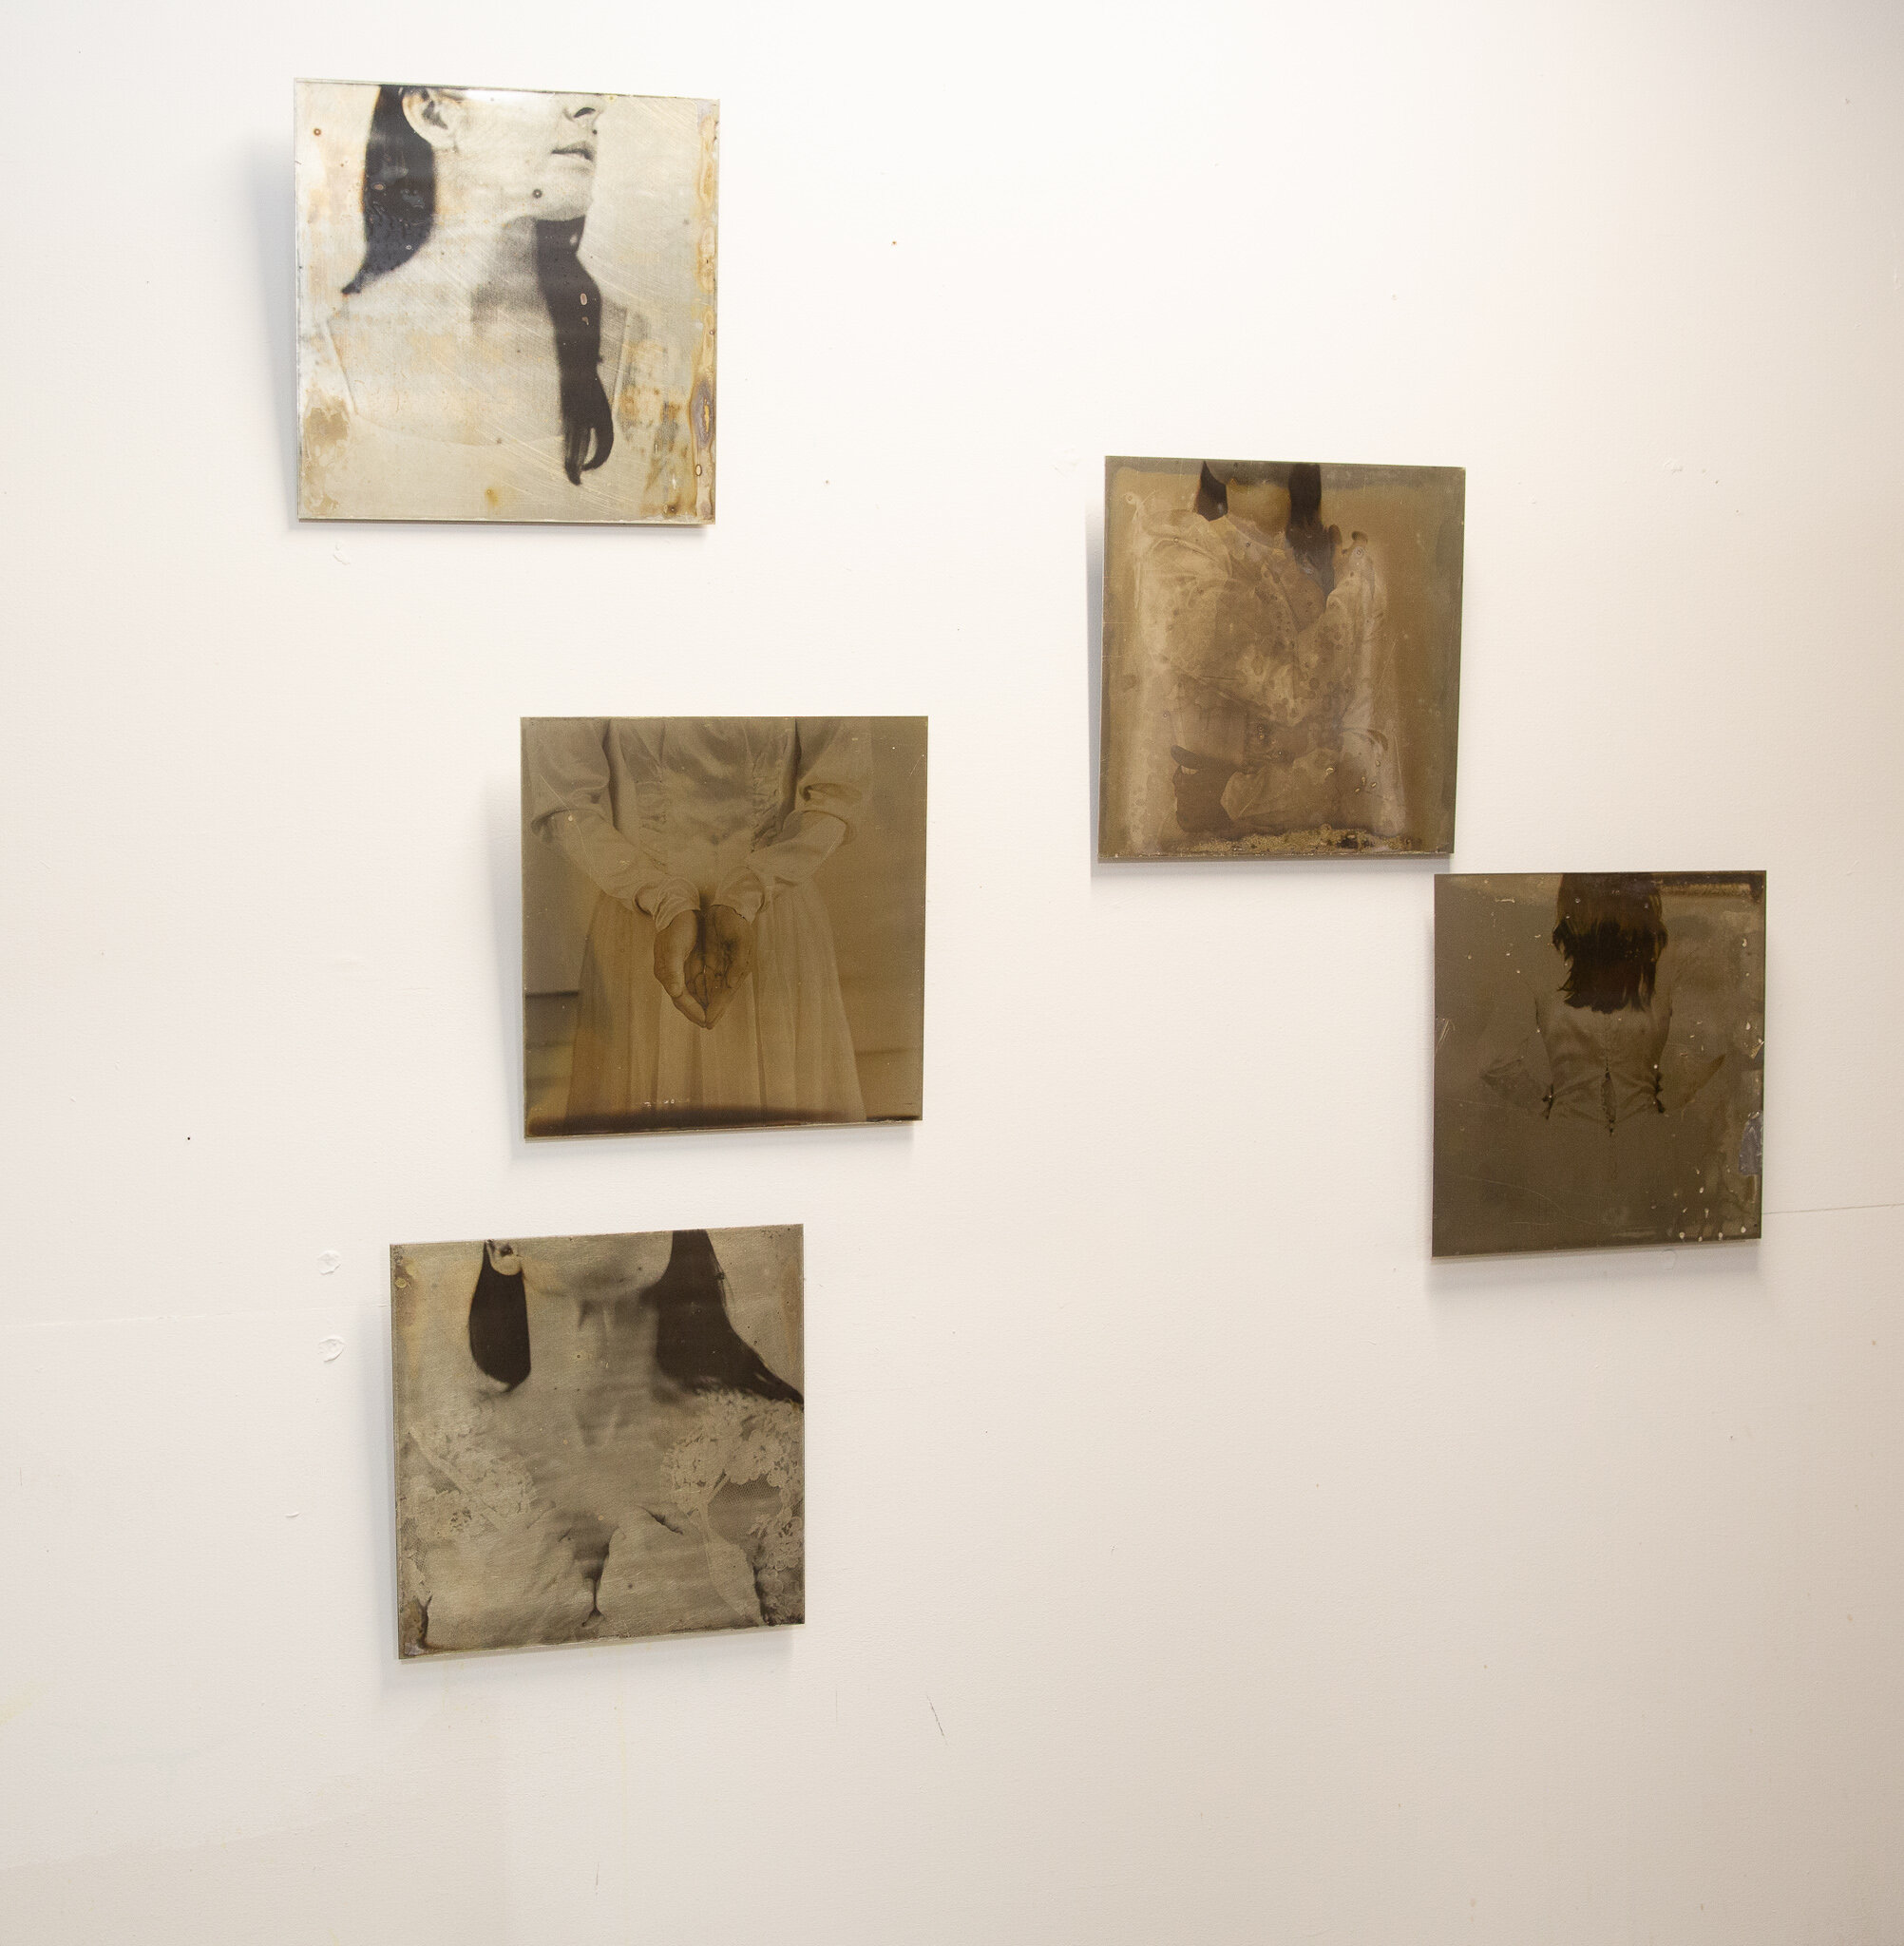  Installation view of  The Void  Liquid emulsion on found steel plates, ea. 12x12 inches 